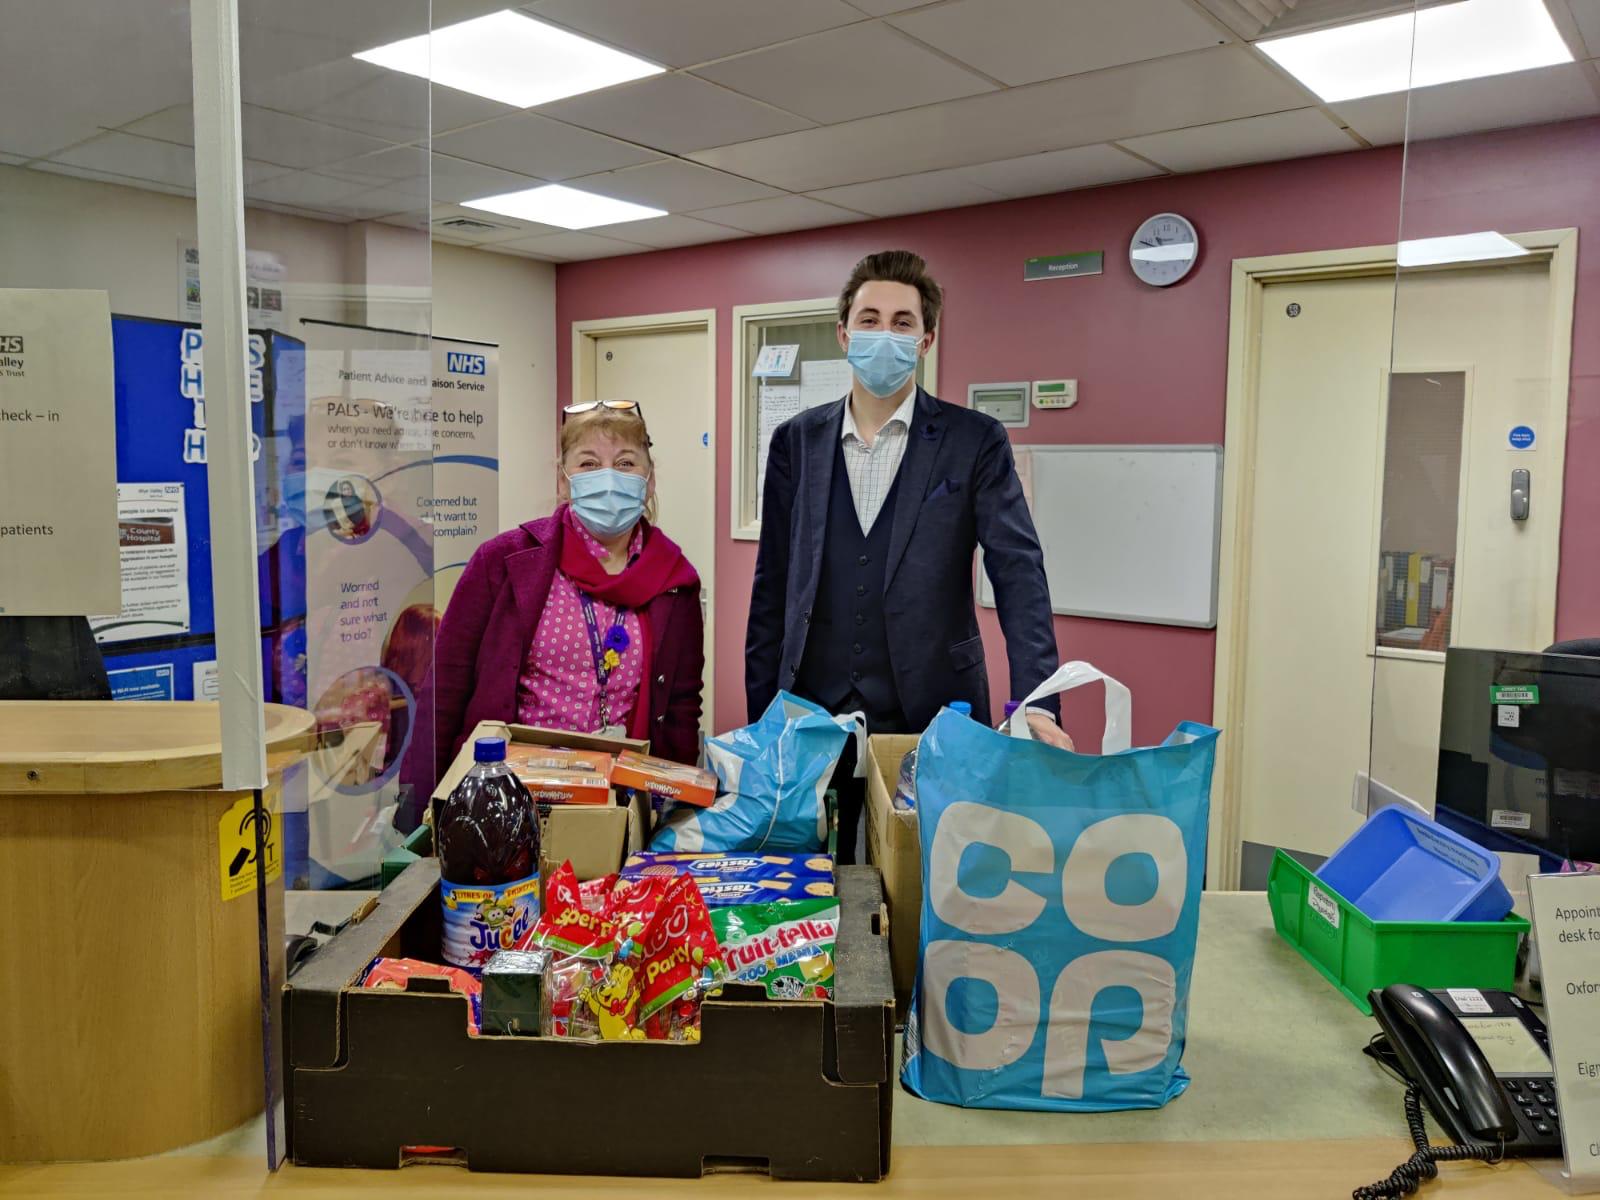 COMMUNITY | Hereford City Rotary Club collect treats for patients at hospitals in Hereford